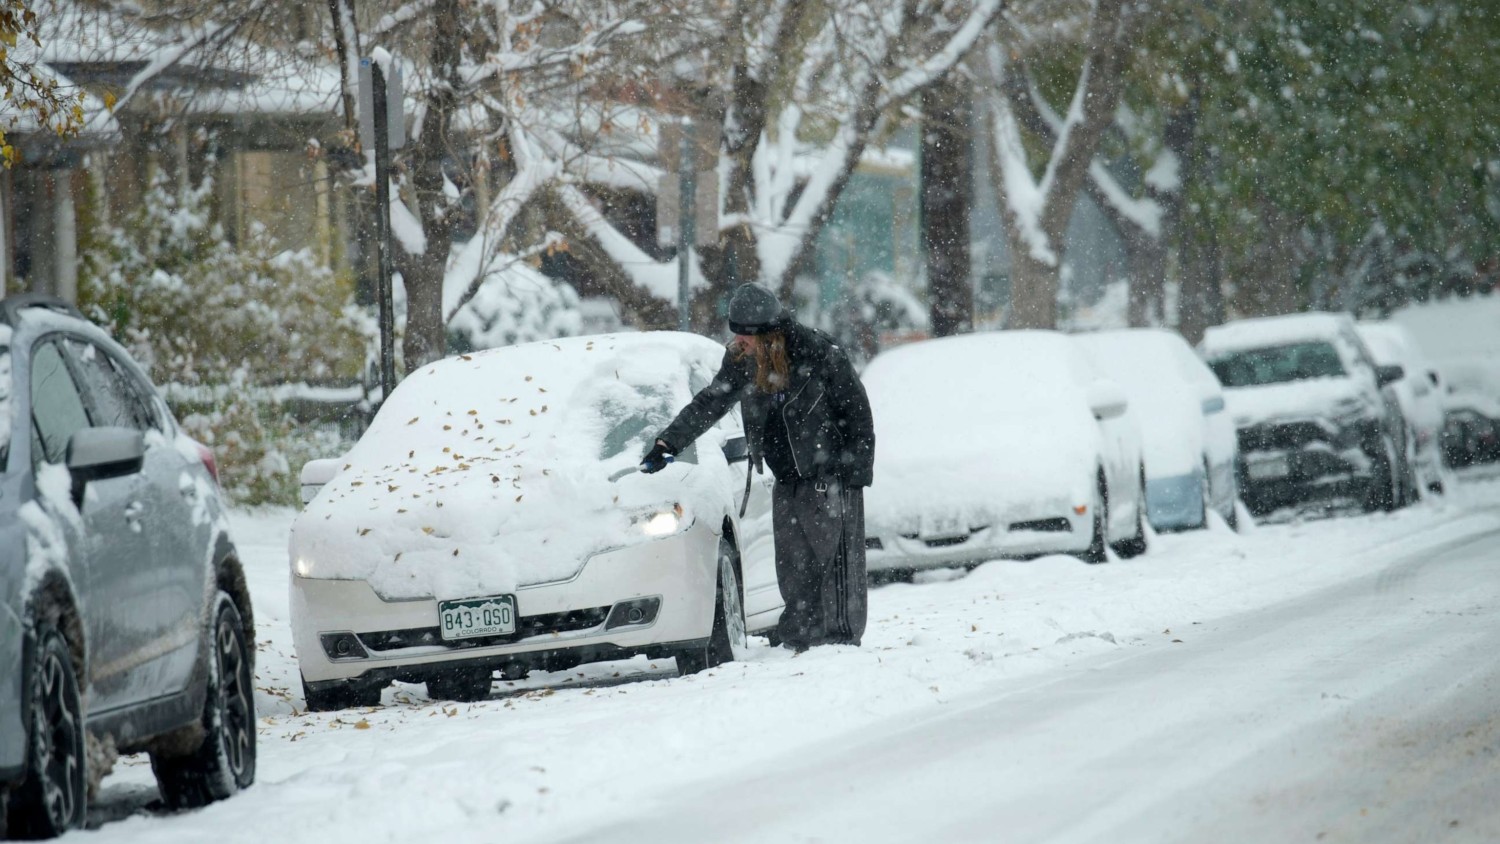 A motorist clears snow from a vehicle after a winter storm dumped up to a foot of snow in some Front Range communities, Oct. 29, 2023, in Denver. David Zalubowski/AP